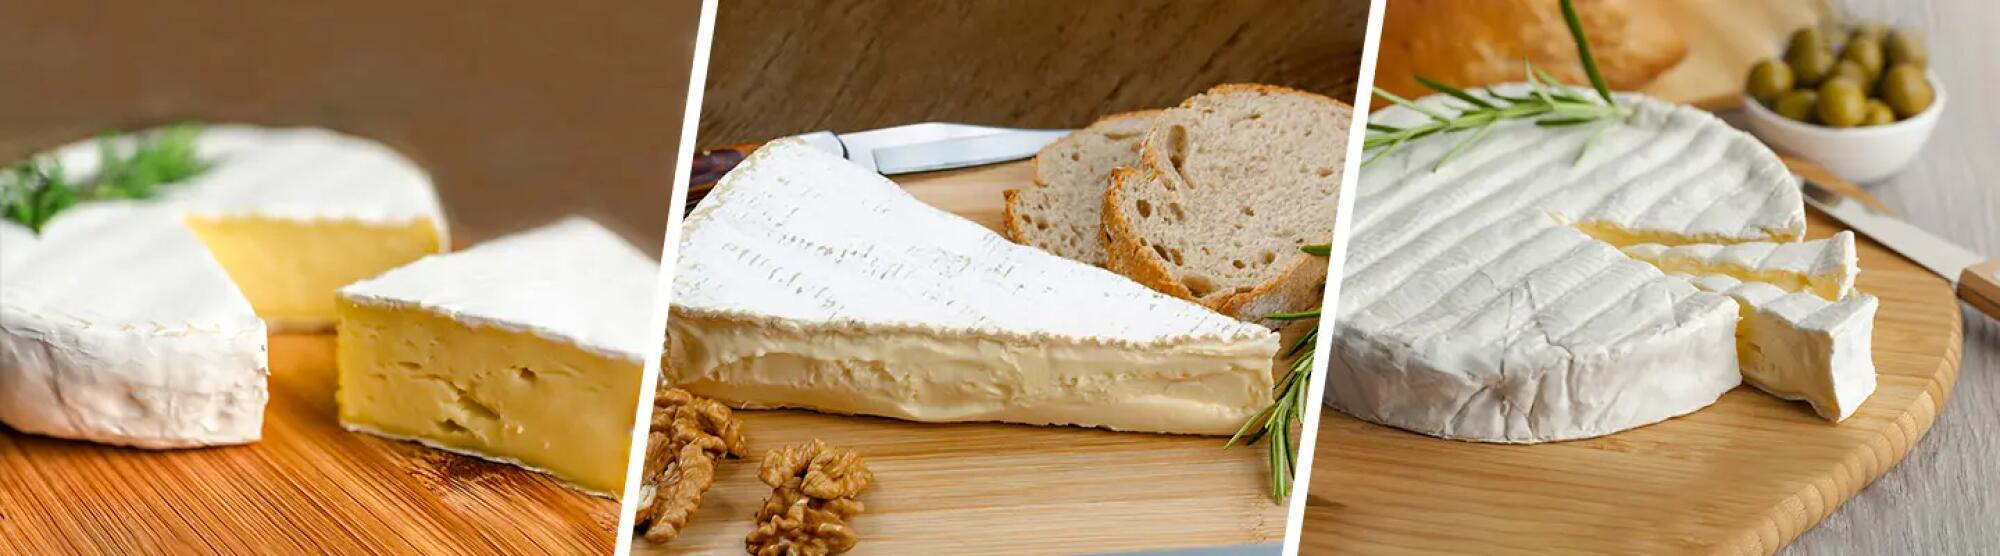 Brie, camembert et coulommiers LA02 Adobe Stock